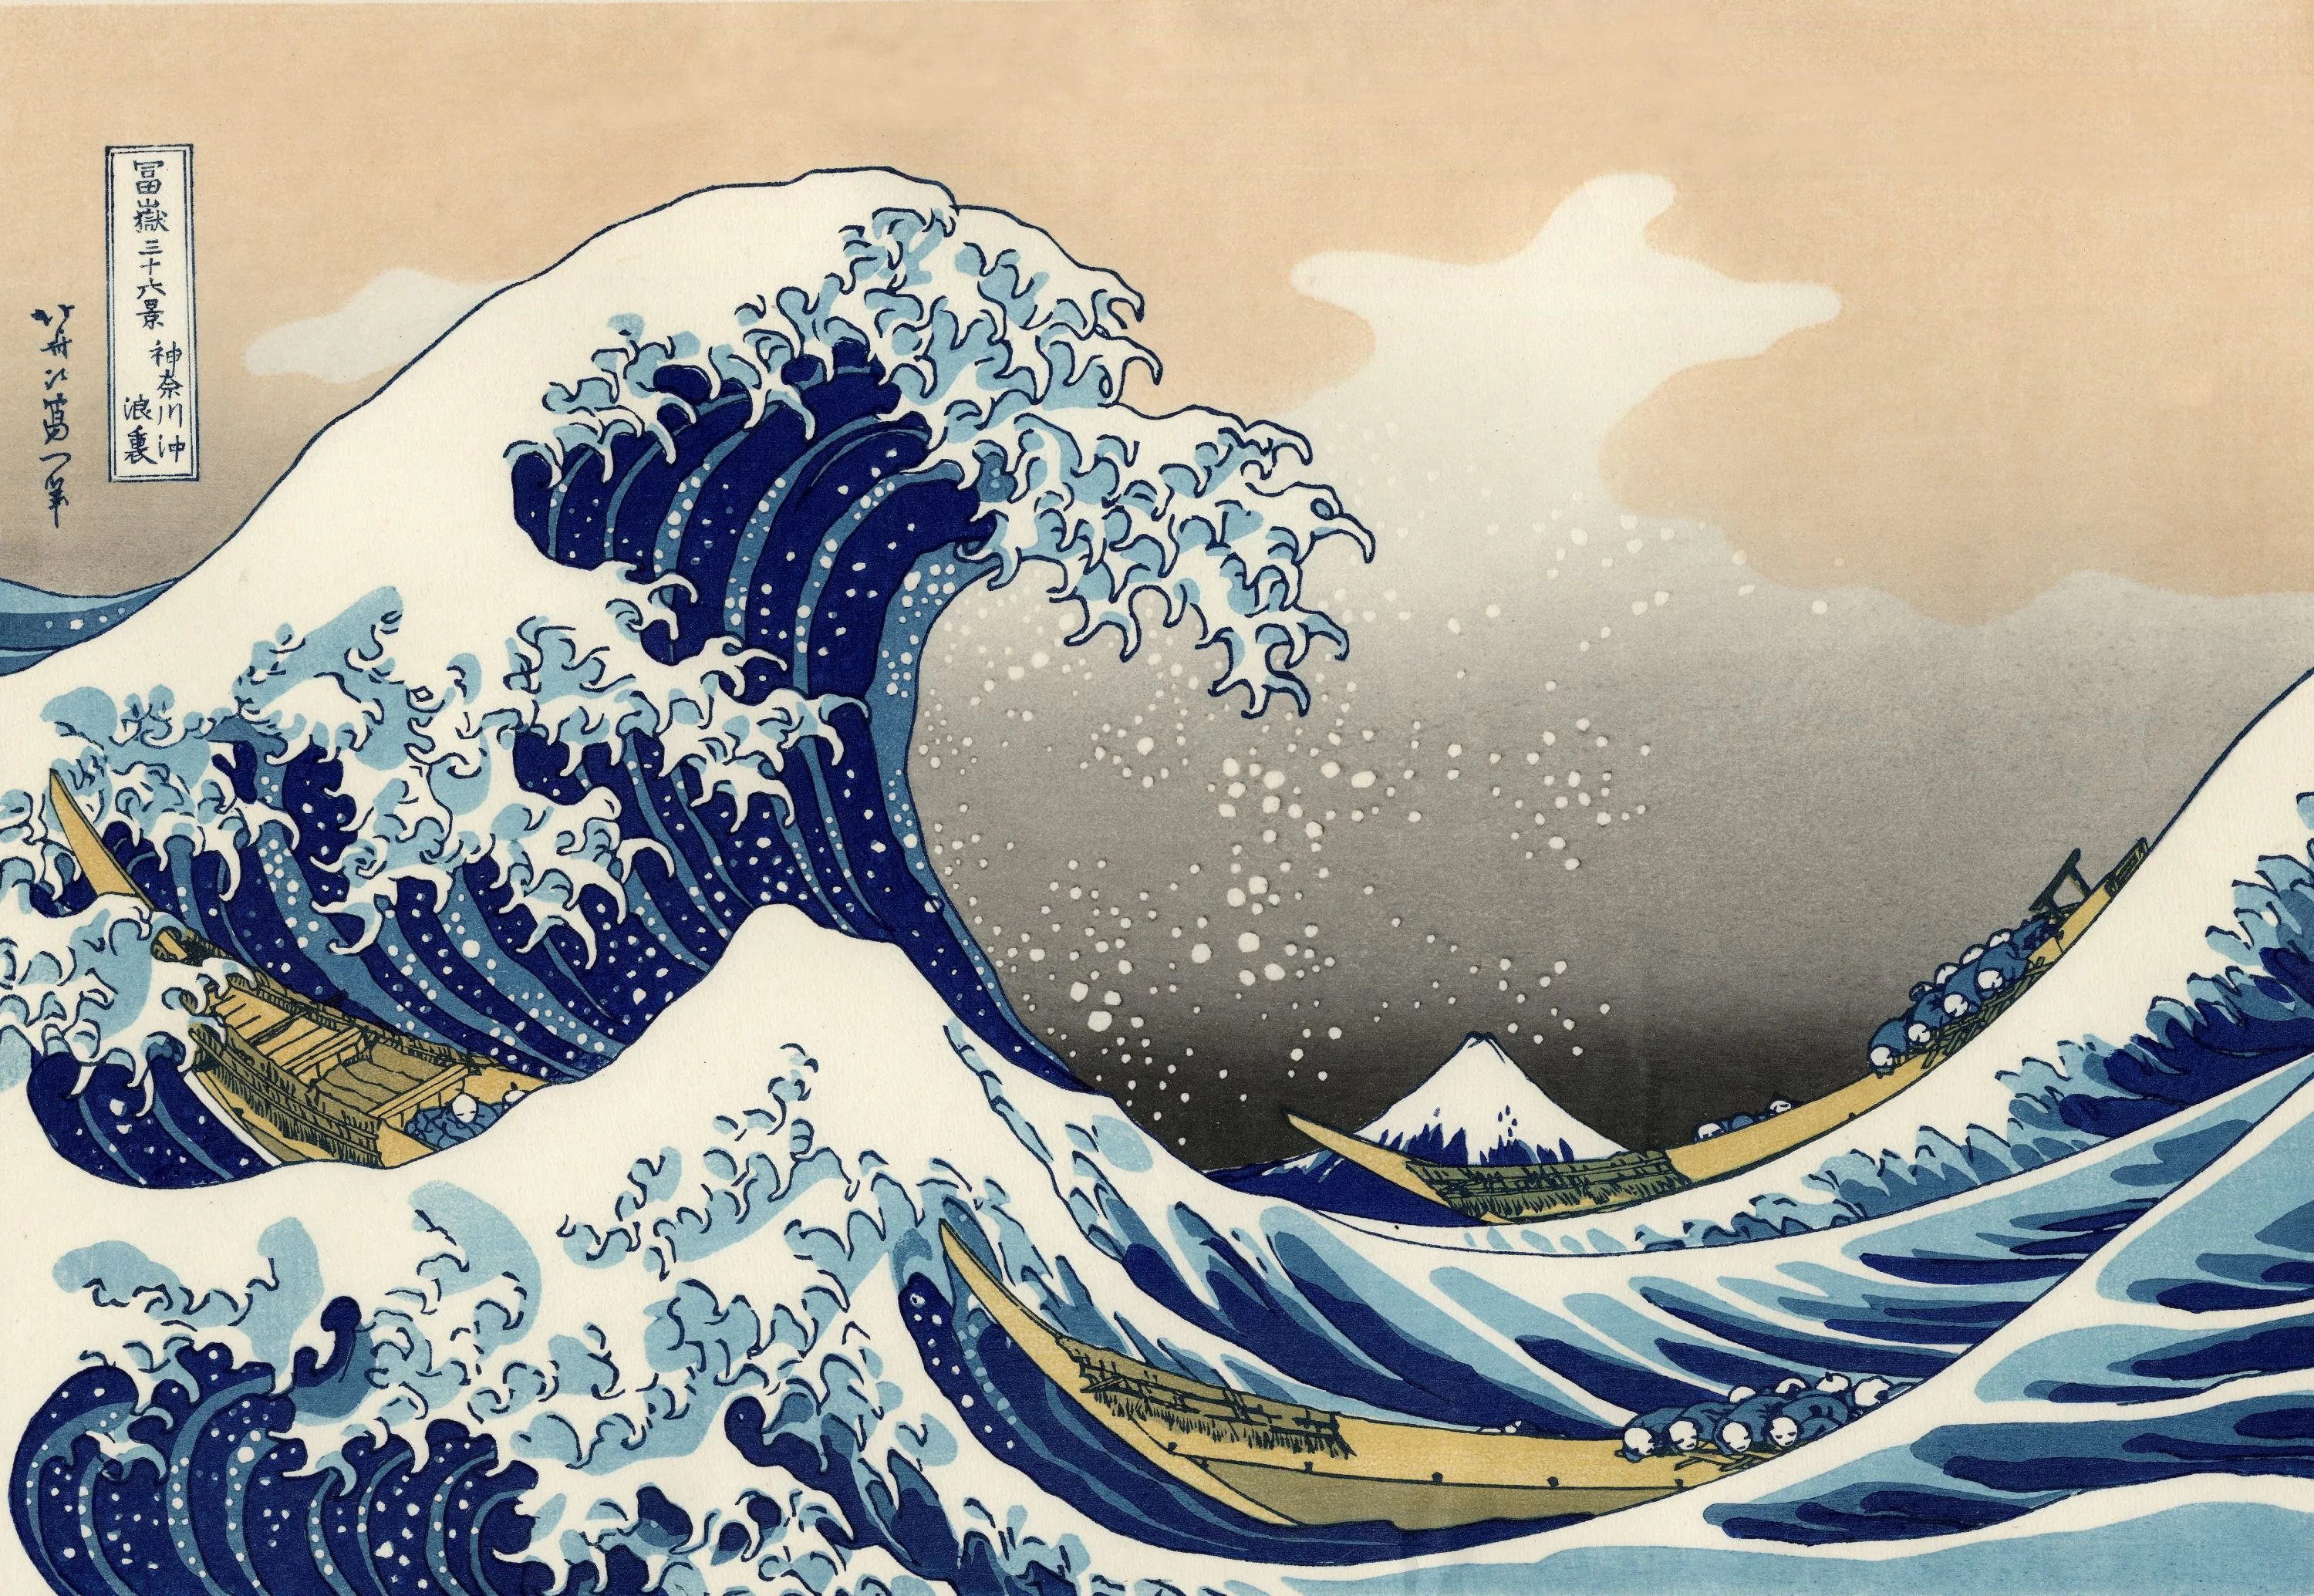 BRITISH-MUSEUM-Katsushika-Hokusai-The-Great-Wave-off-Kanagawa-(1831).-Minted-as-an-ultra-rare-type-only-two-NFTs-were-offered-for-the-bidding.andnbsp